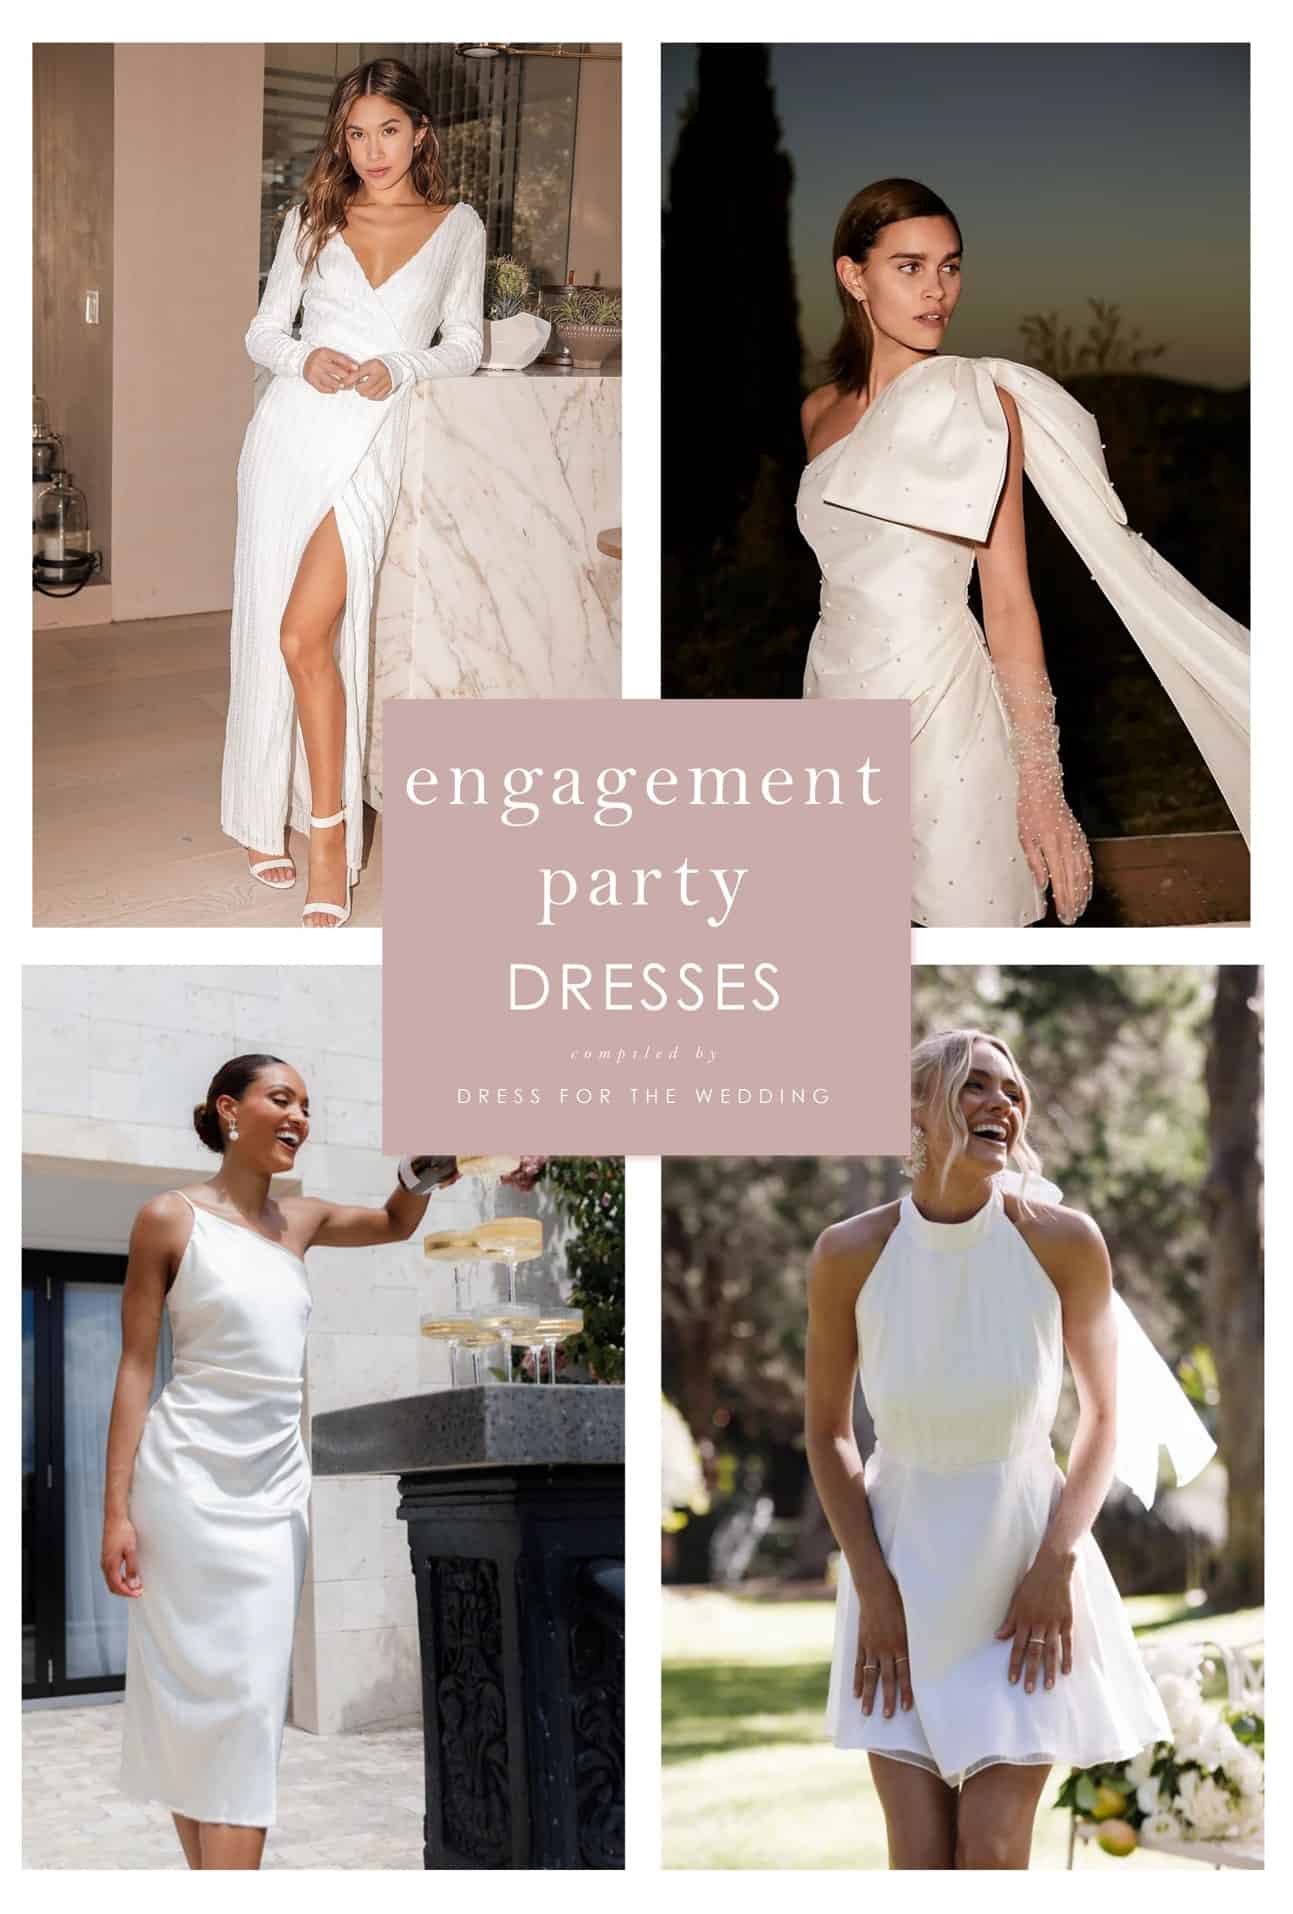 Black Owned Bridal Engagement and Bridesmaids Dresses - Kiana Carn Designs  ~ My Afro Caribbean Wedding